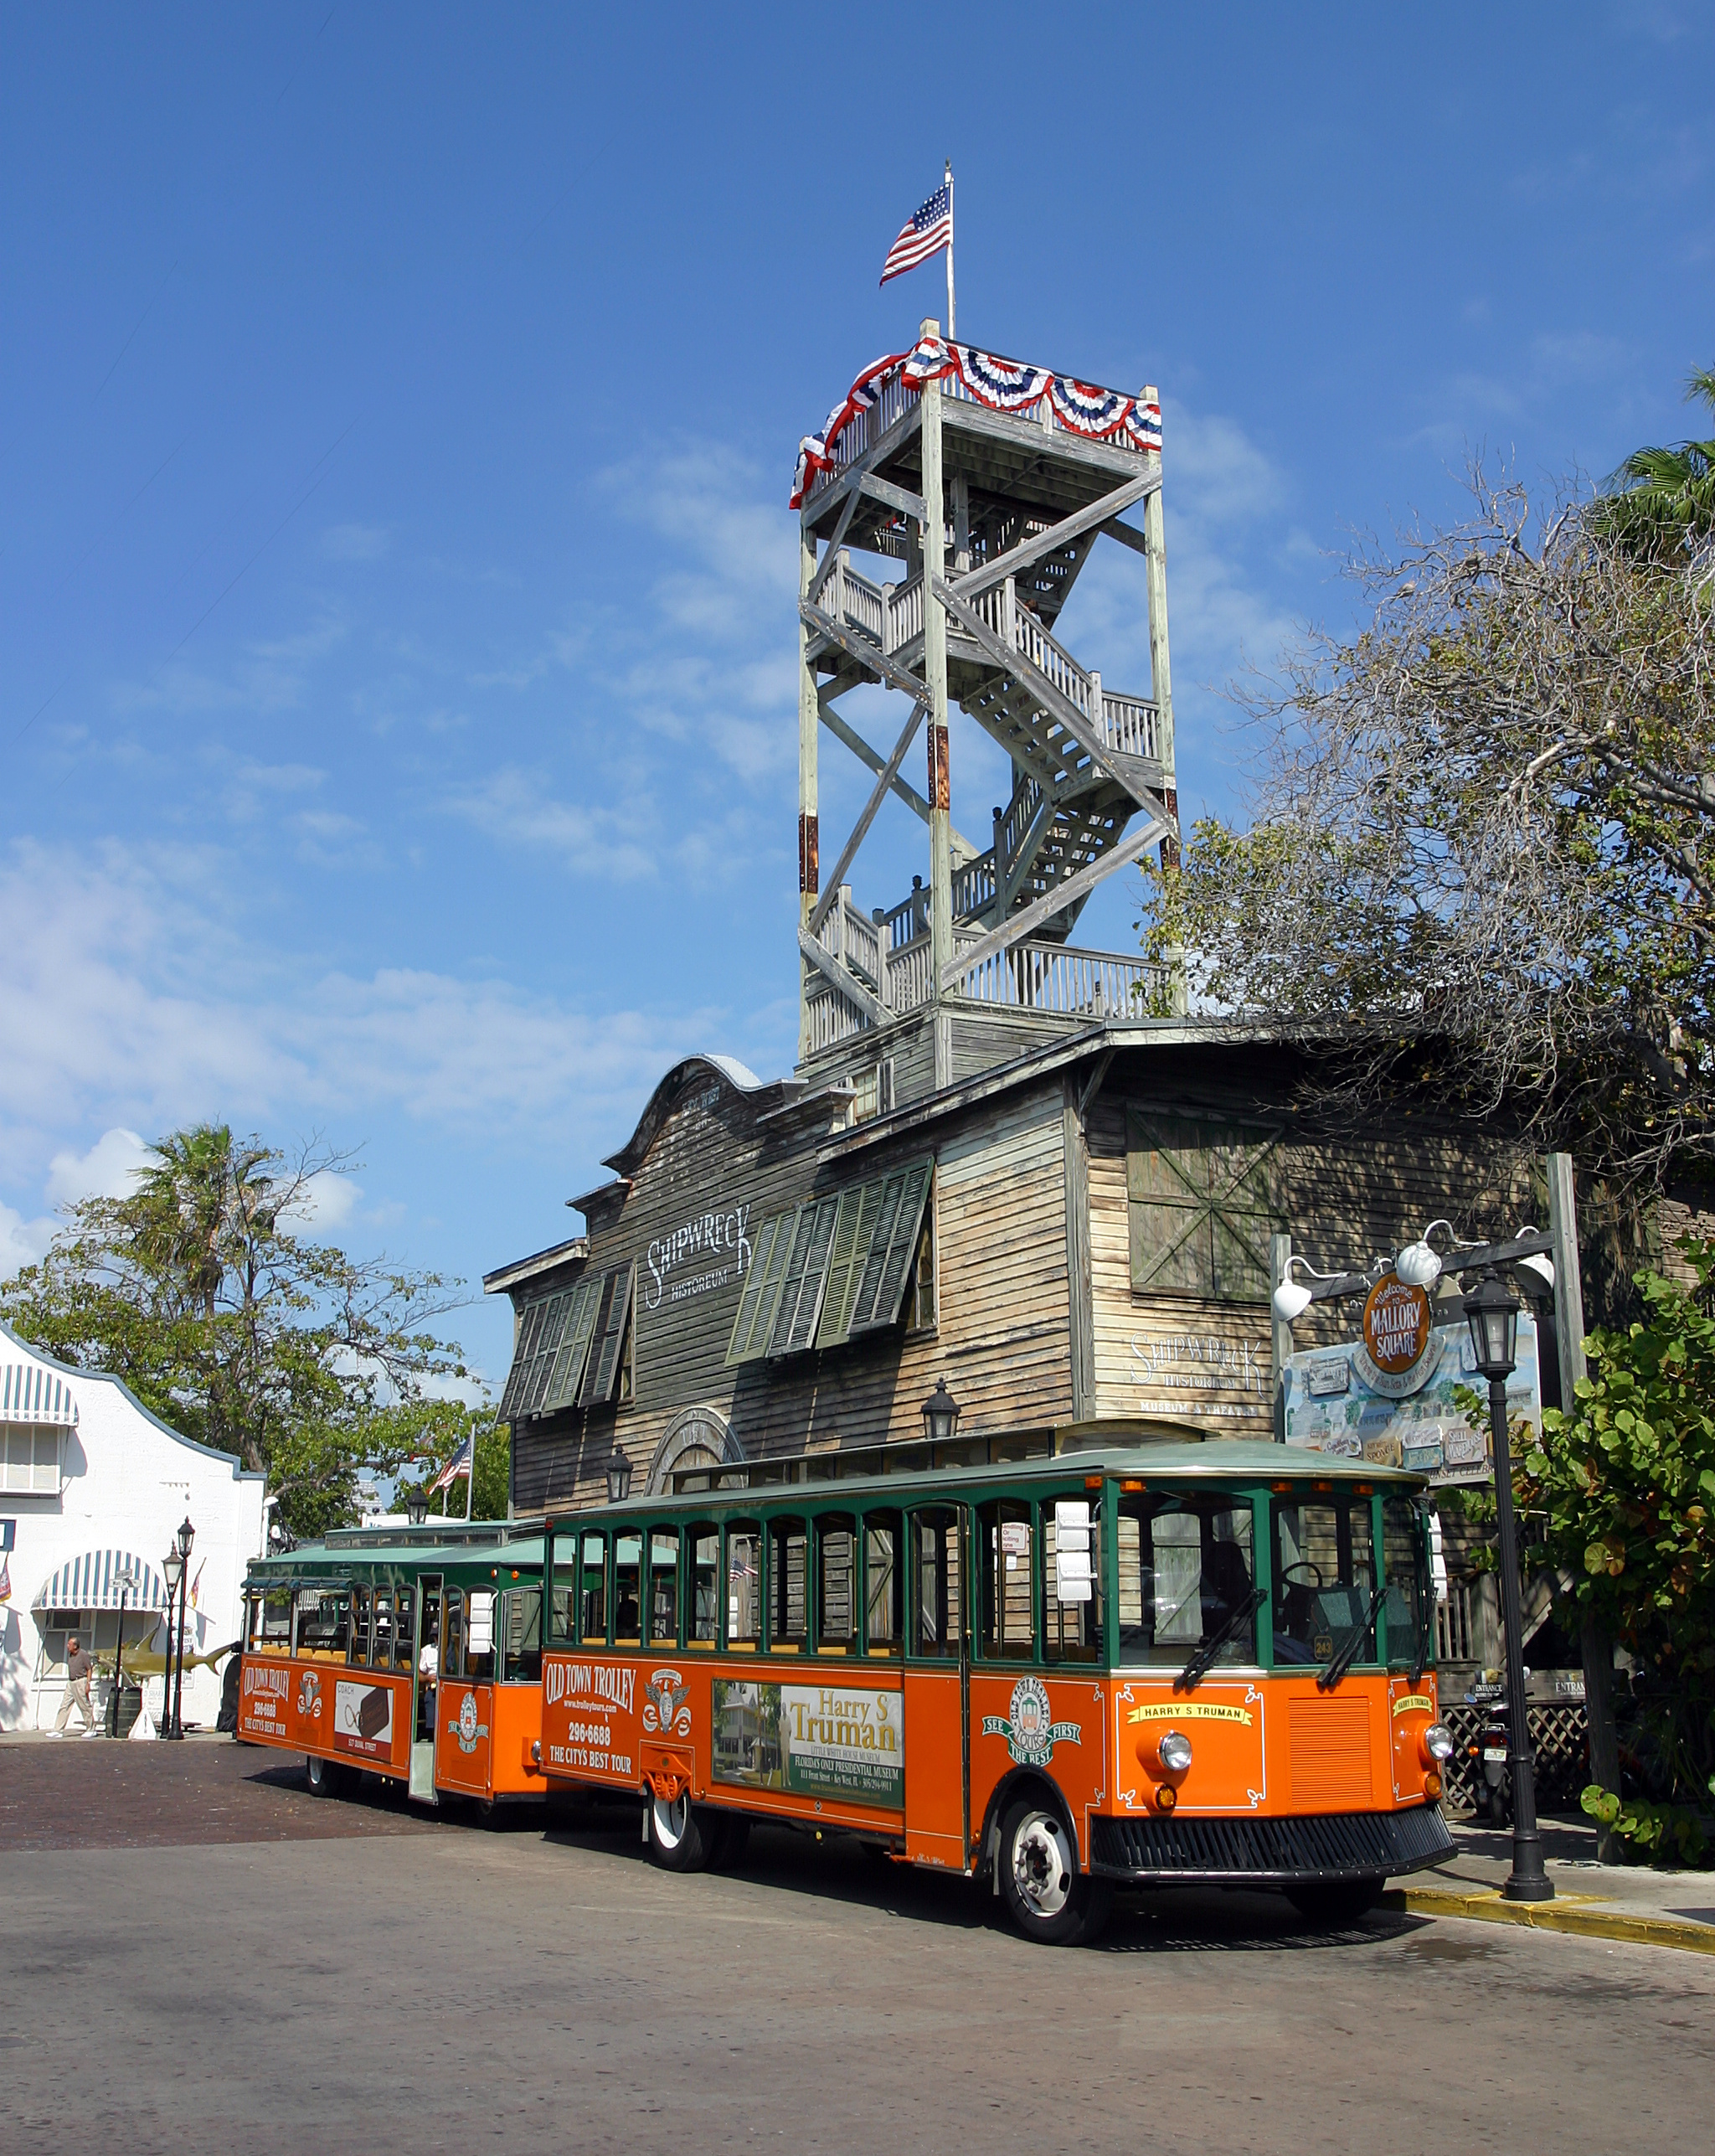 The bright orange trolley in Key West ensures tourists catch all the top attractions including the Southernmost Point, Key West Lighthouse, Mallory Square, and more!